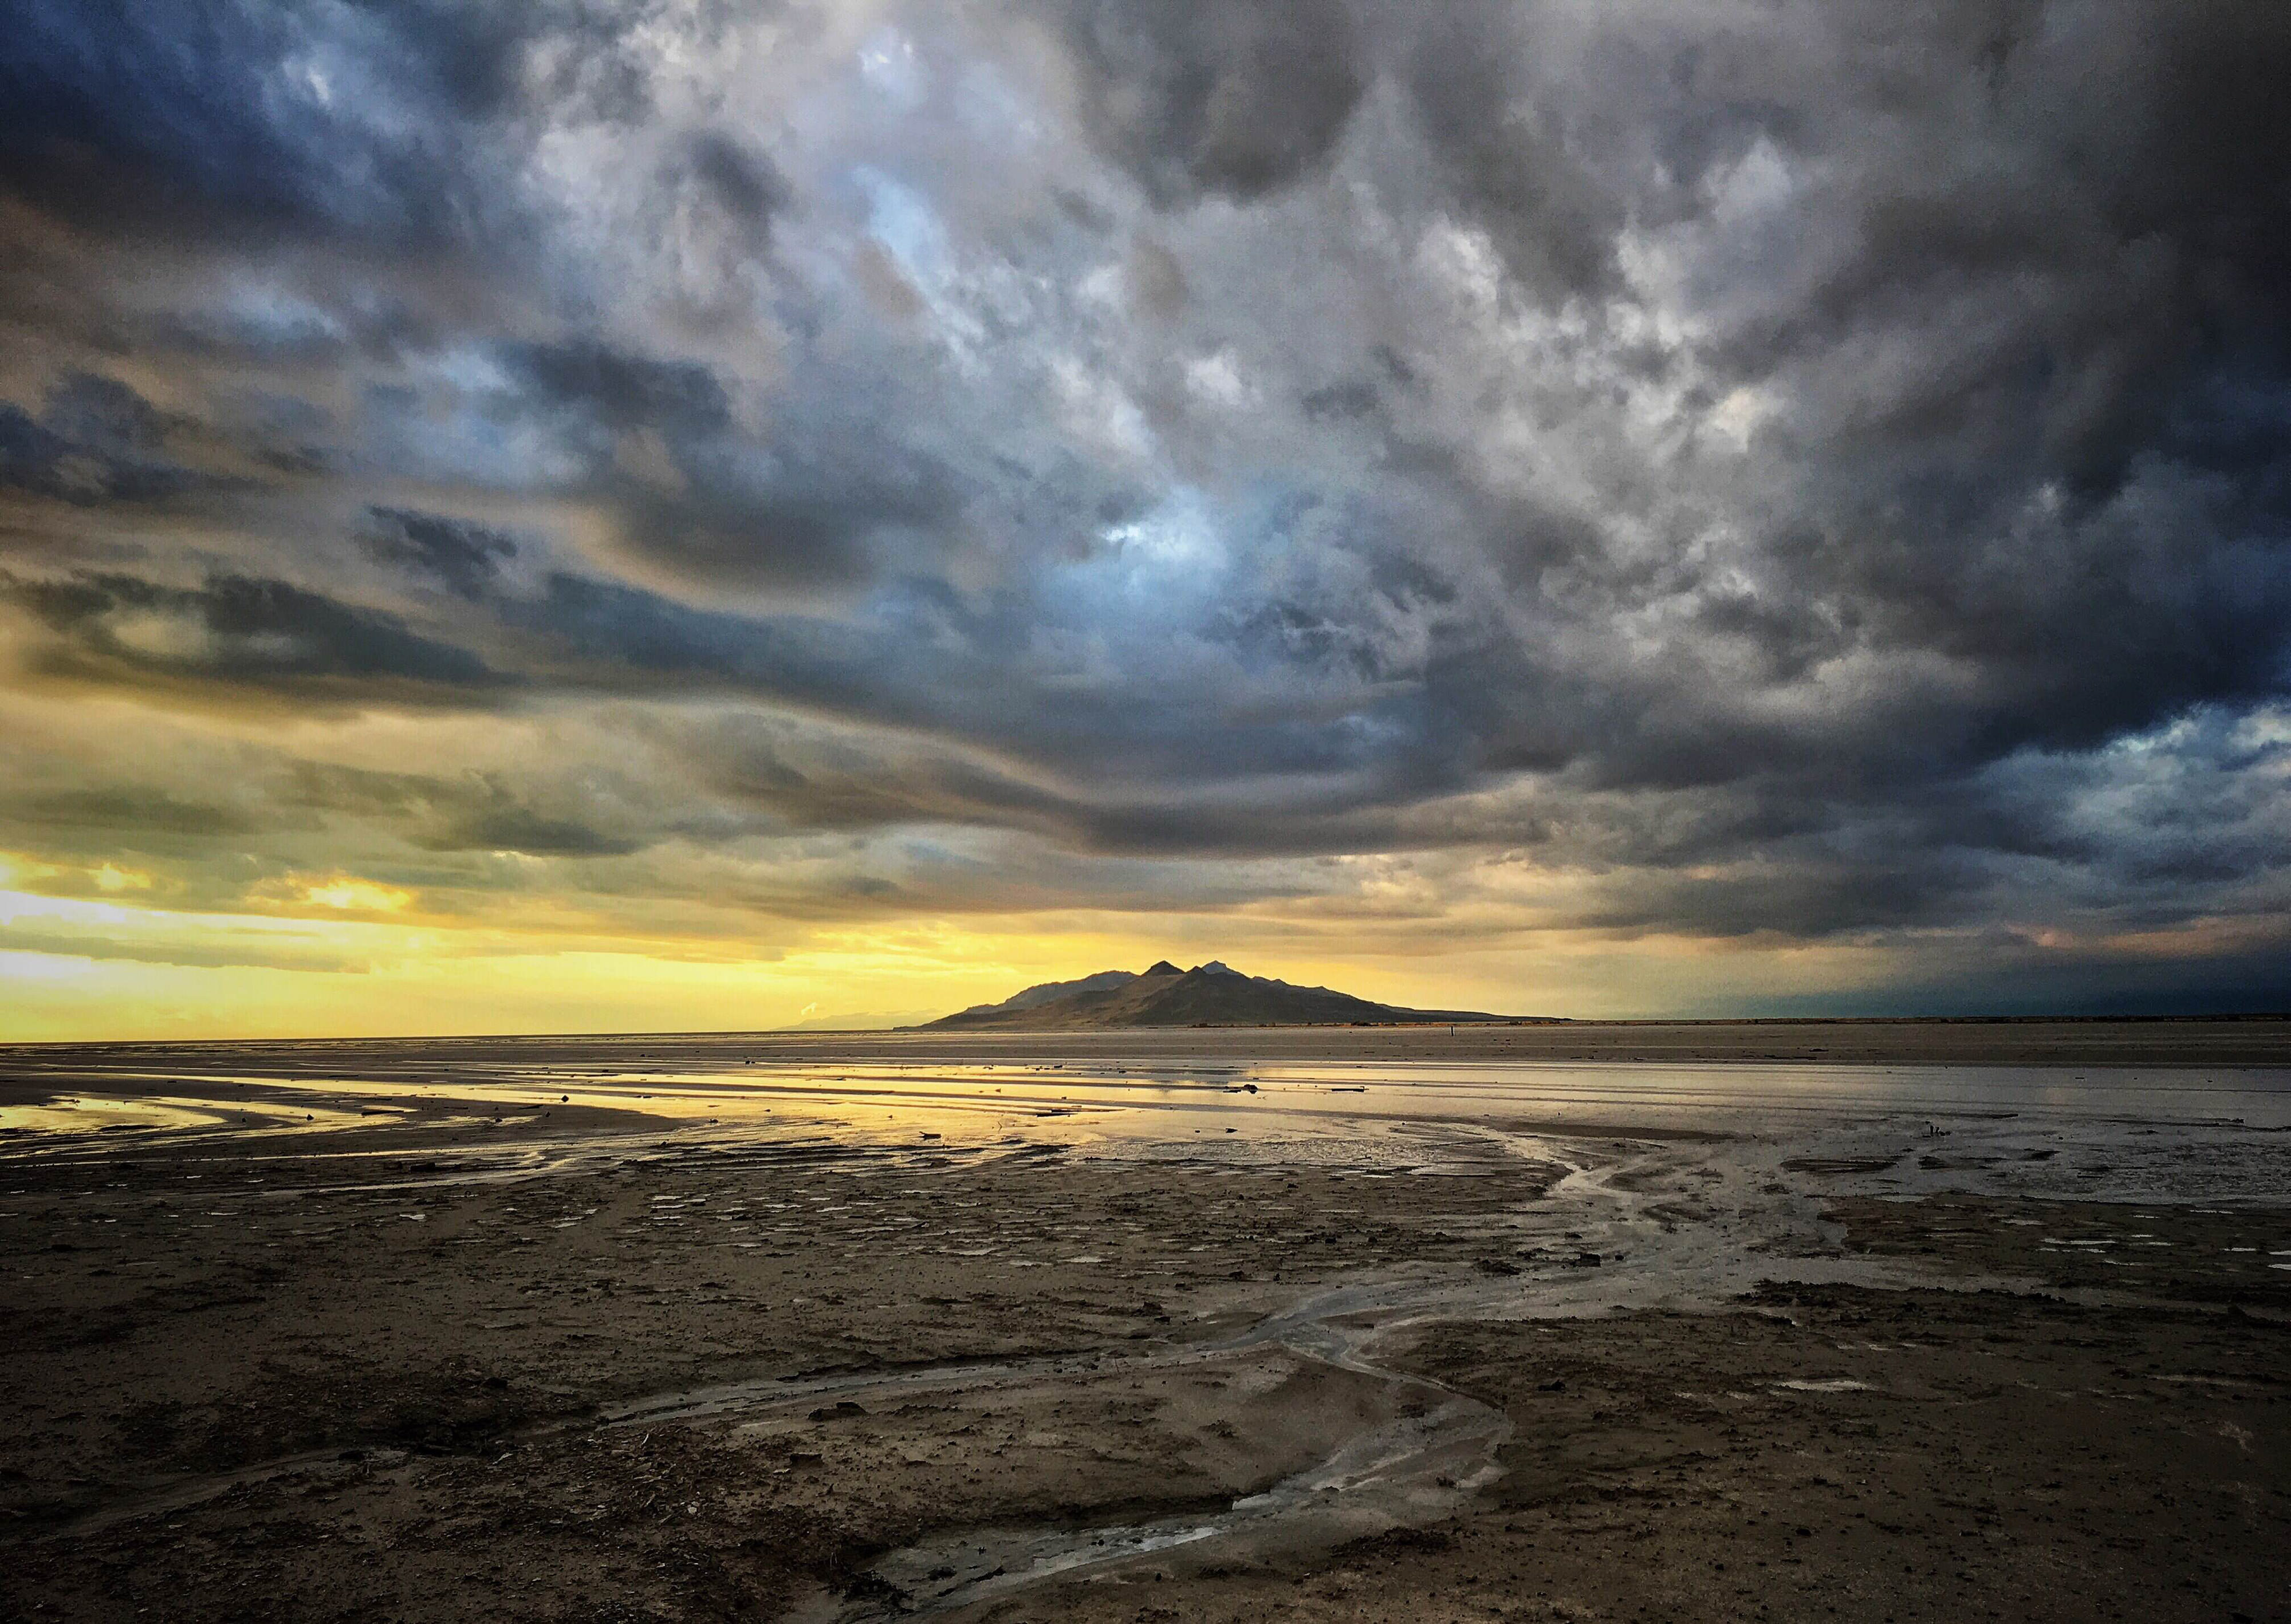 Shallow water in the great salt lake under dramatic cloudy skies with a hill in the distance.